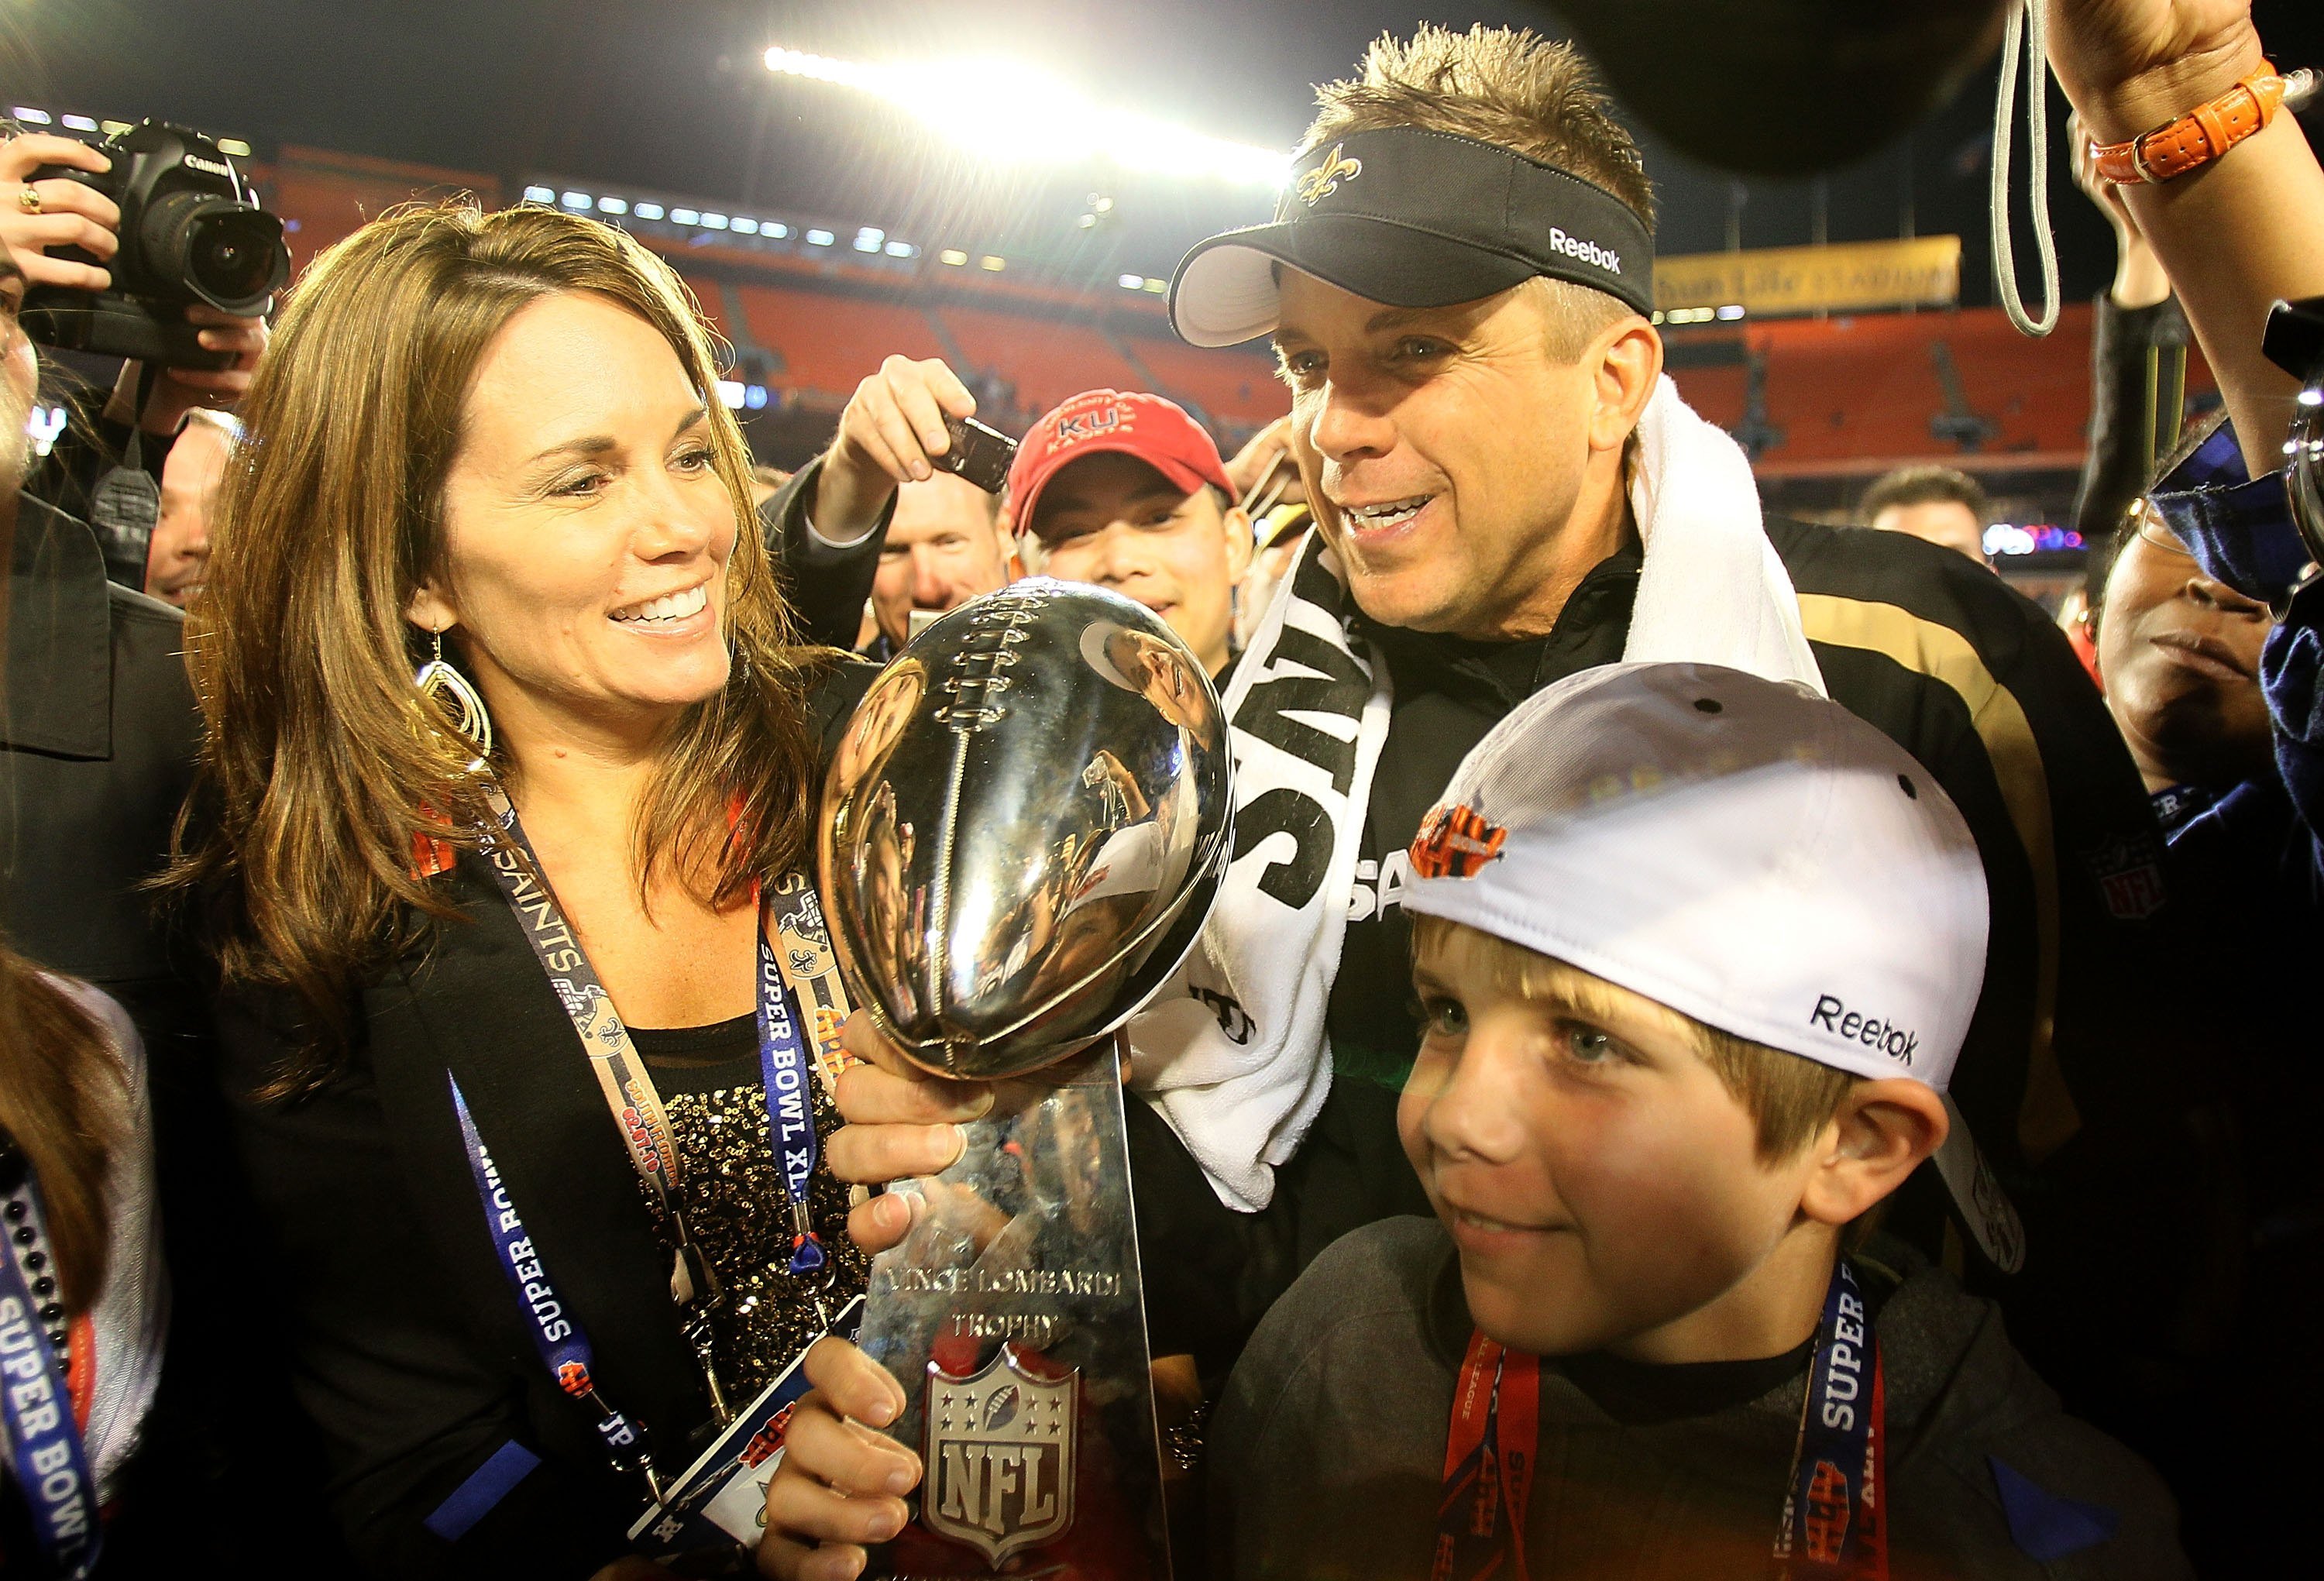 Sean Payton with his wife, Beth Shuey, after defeating the Indianapolis Colts during Super Bowl XLIV on February 7, 2010 at Sun Life Stadium in Miami Gardens, Florida. | Source: Getty Images